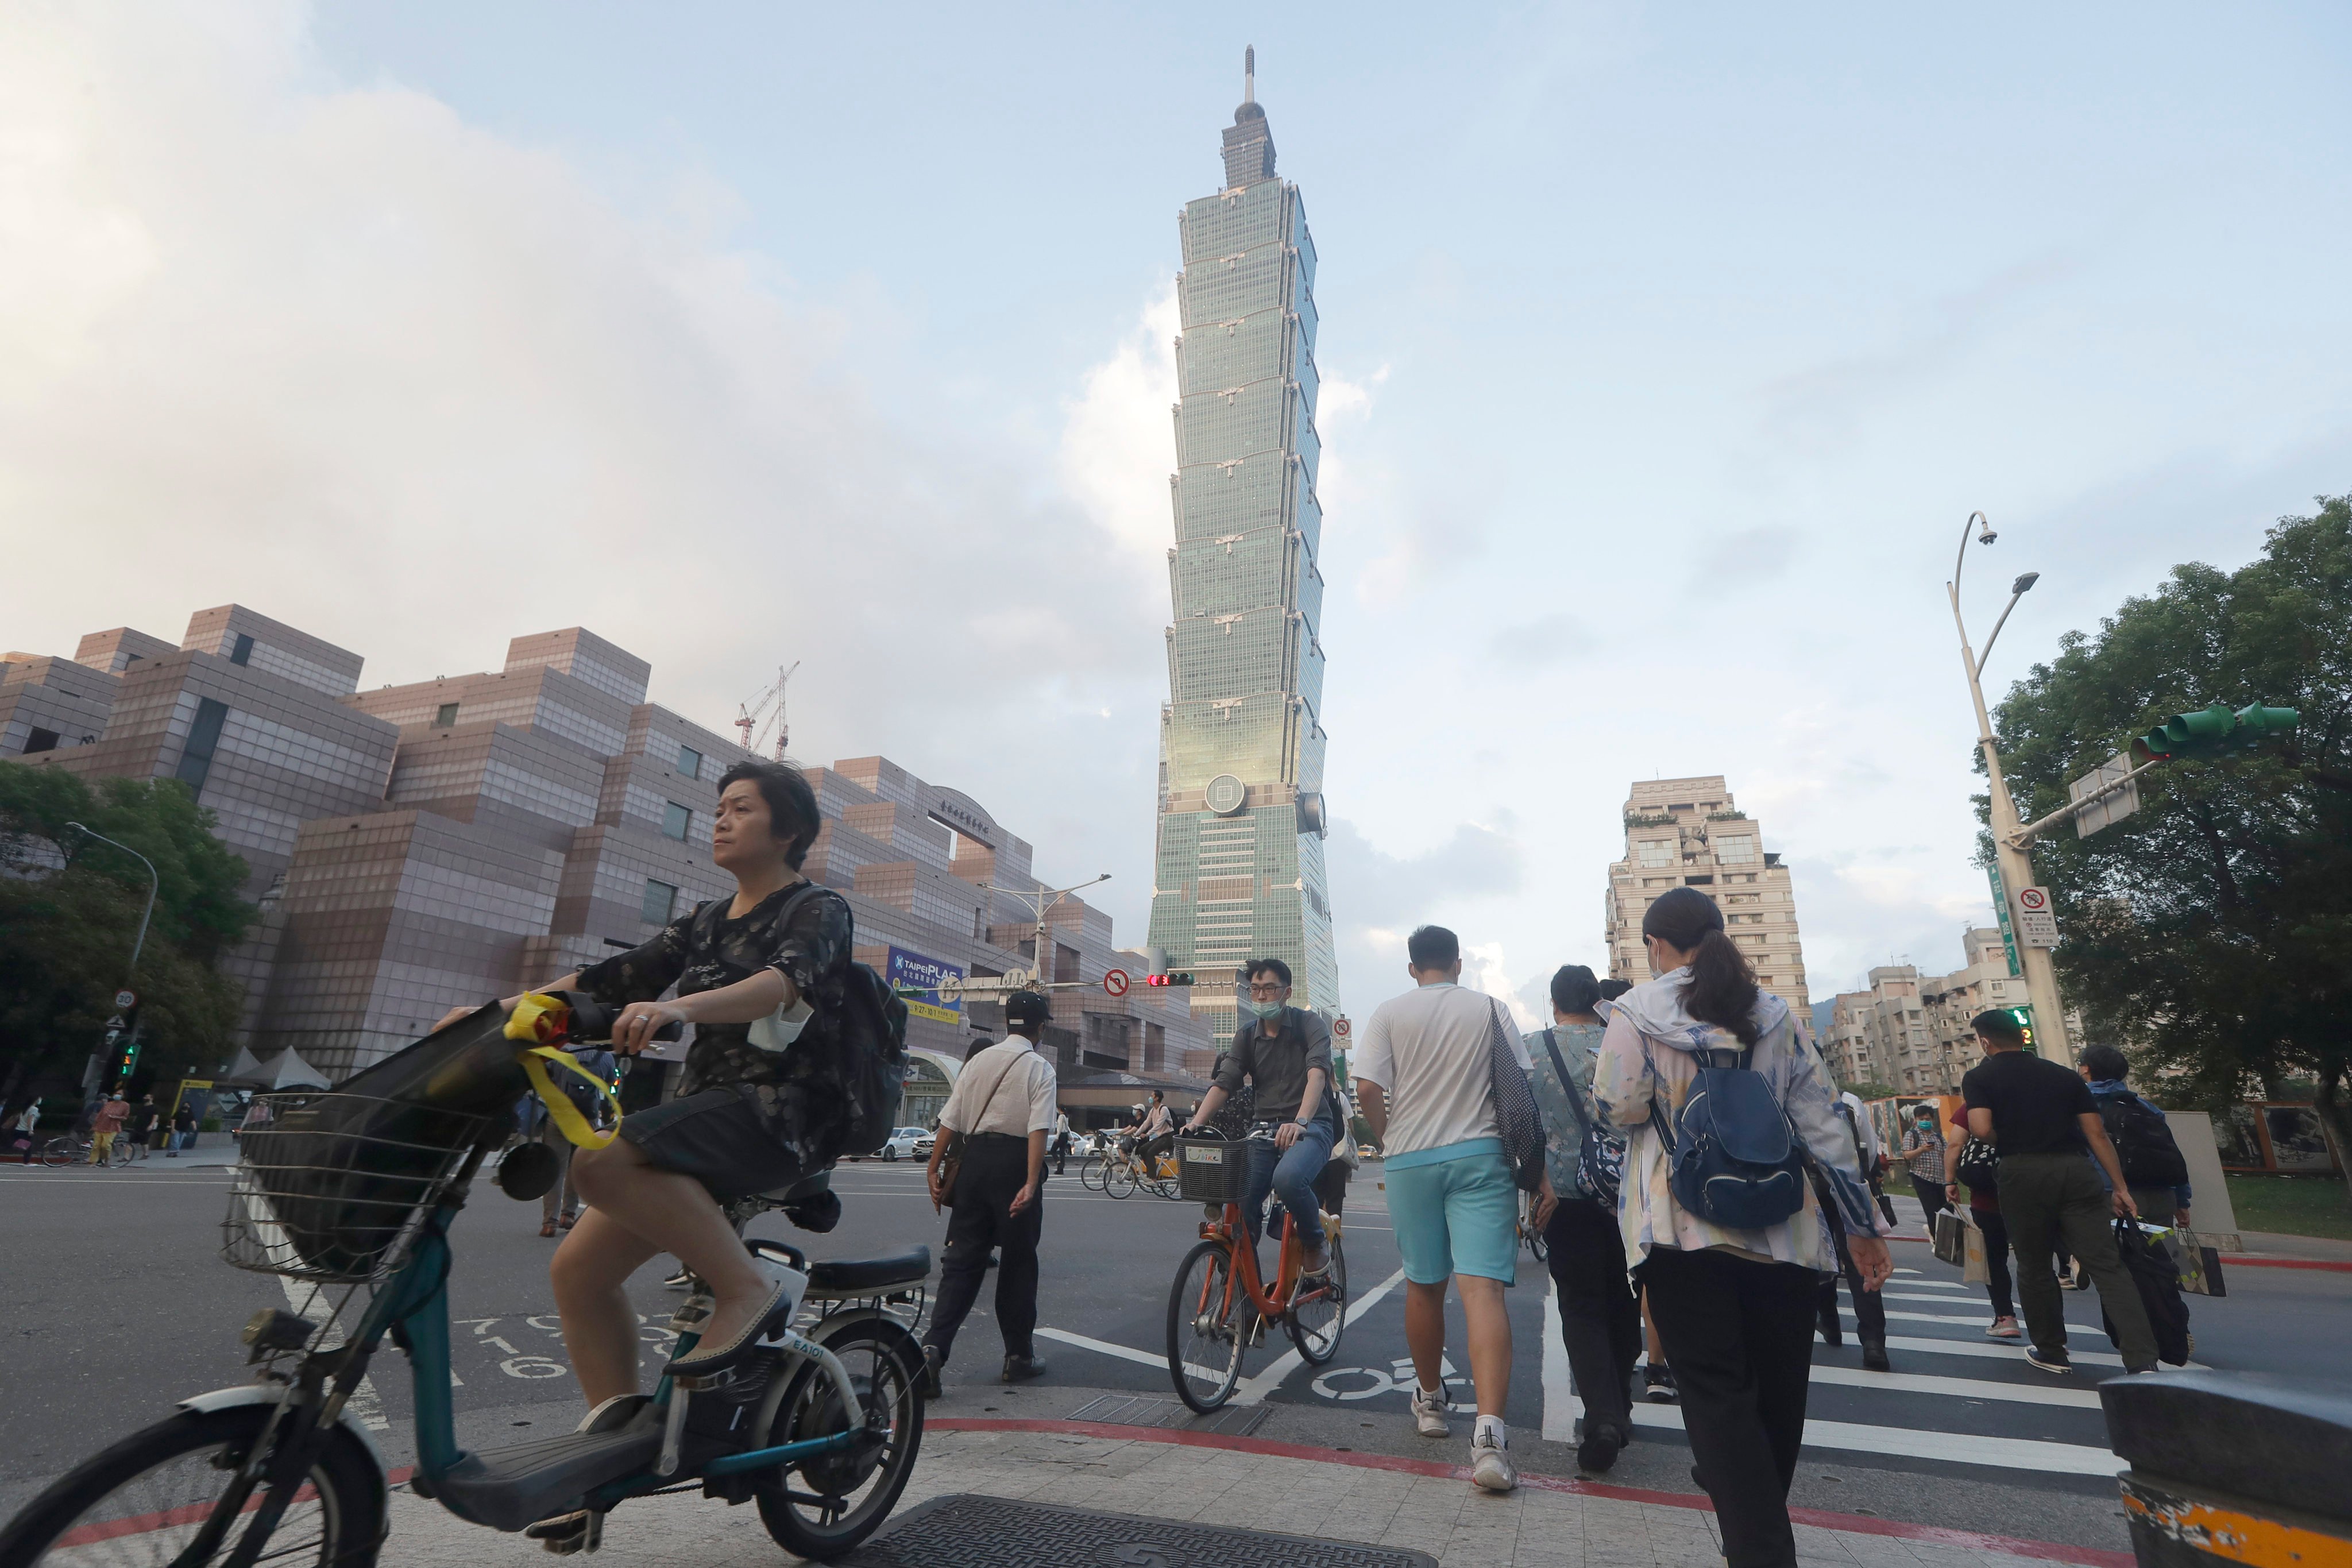 People from mainland China, Hong Kong and Macau will be allowed to visit Taiwan for family, funerals and business purposes, according to Taipei’s council on cross-strait policy. Photo: AP